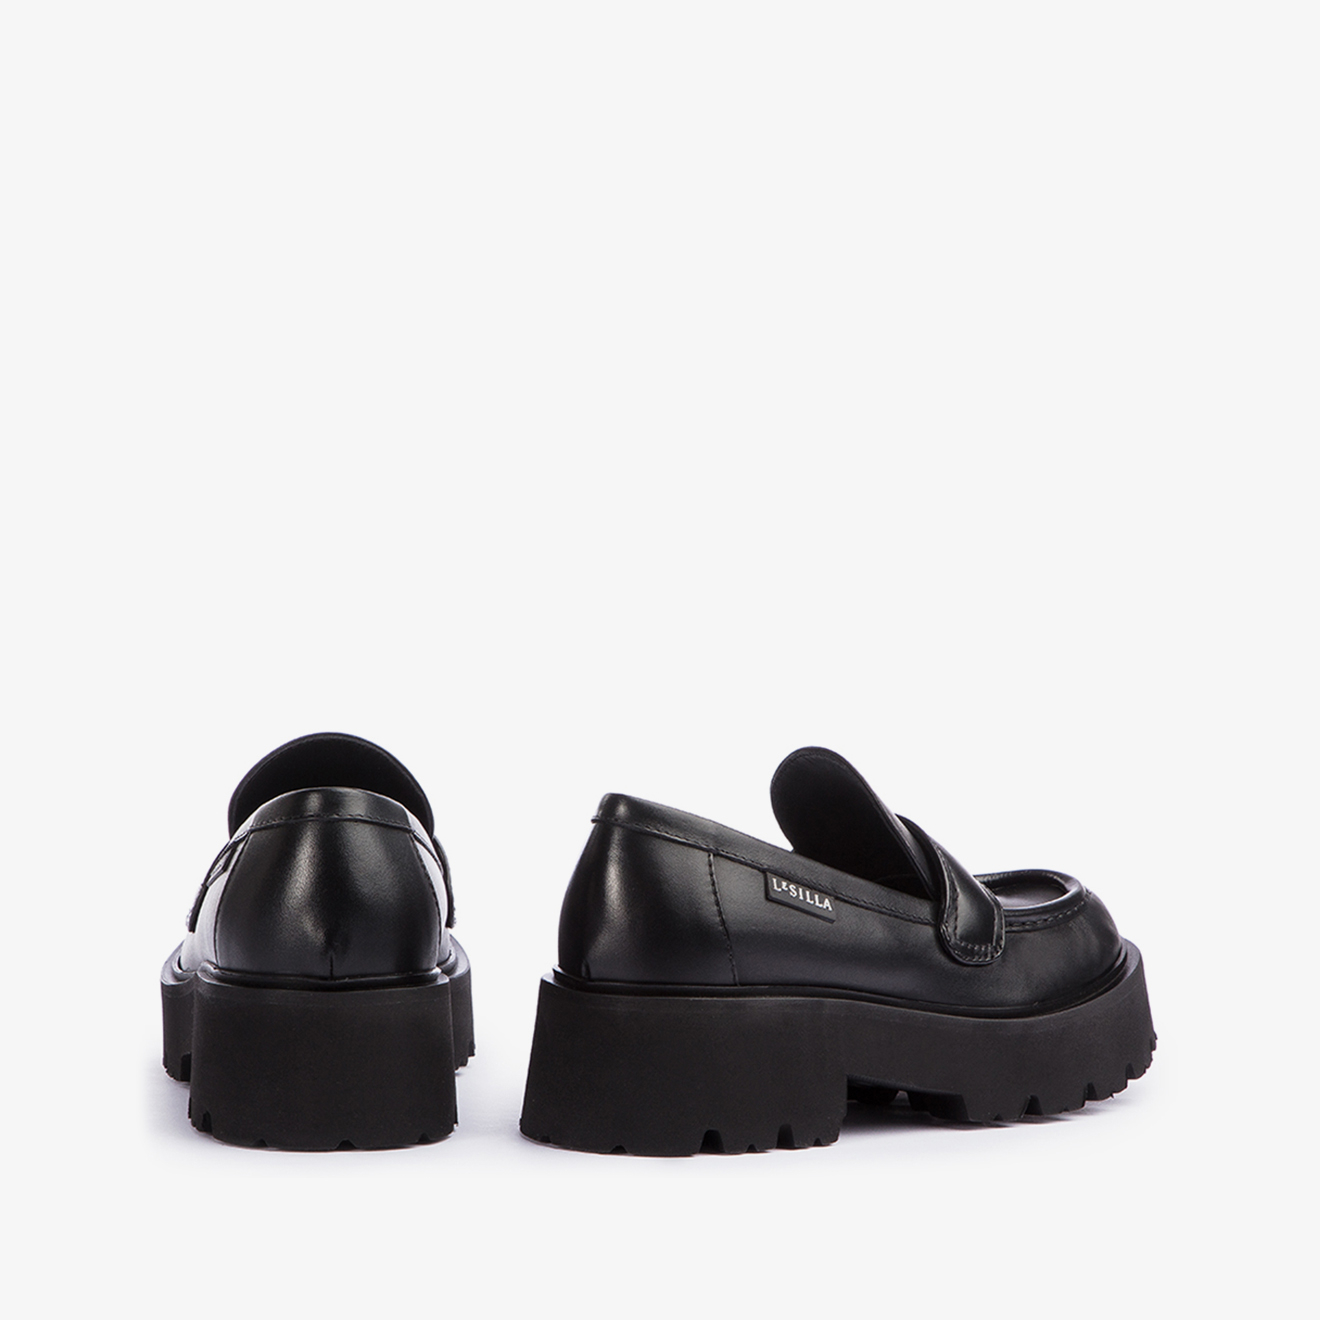 CITYLIFE LOAFER 50 mm - Le Silla official outlet